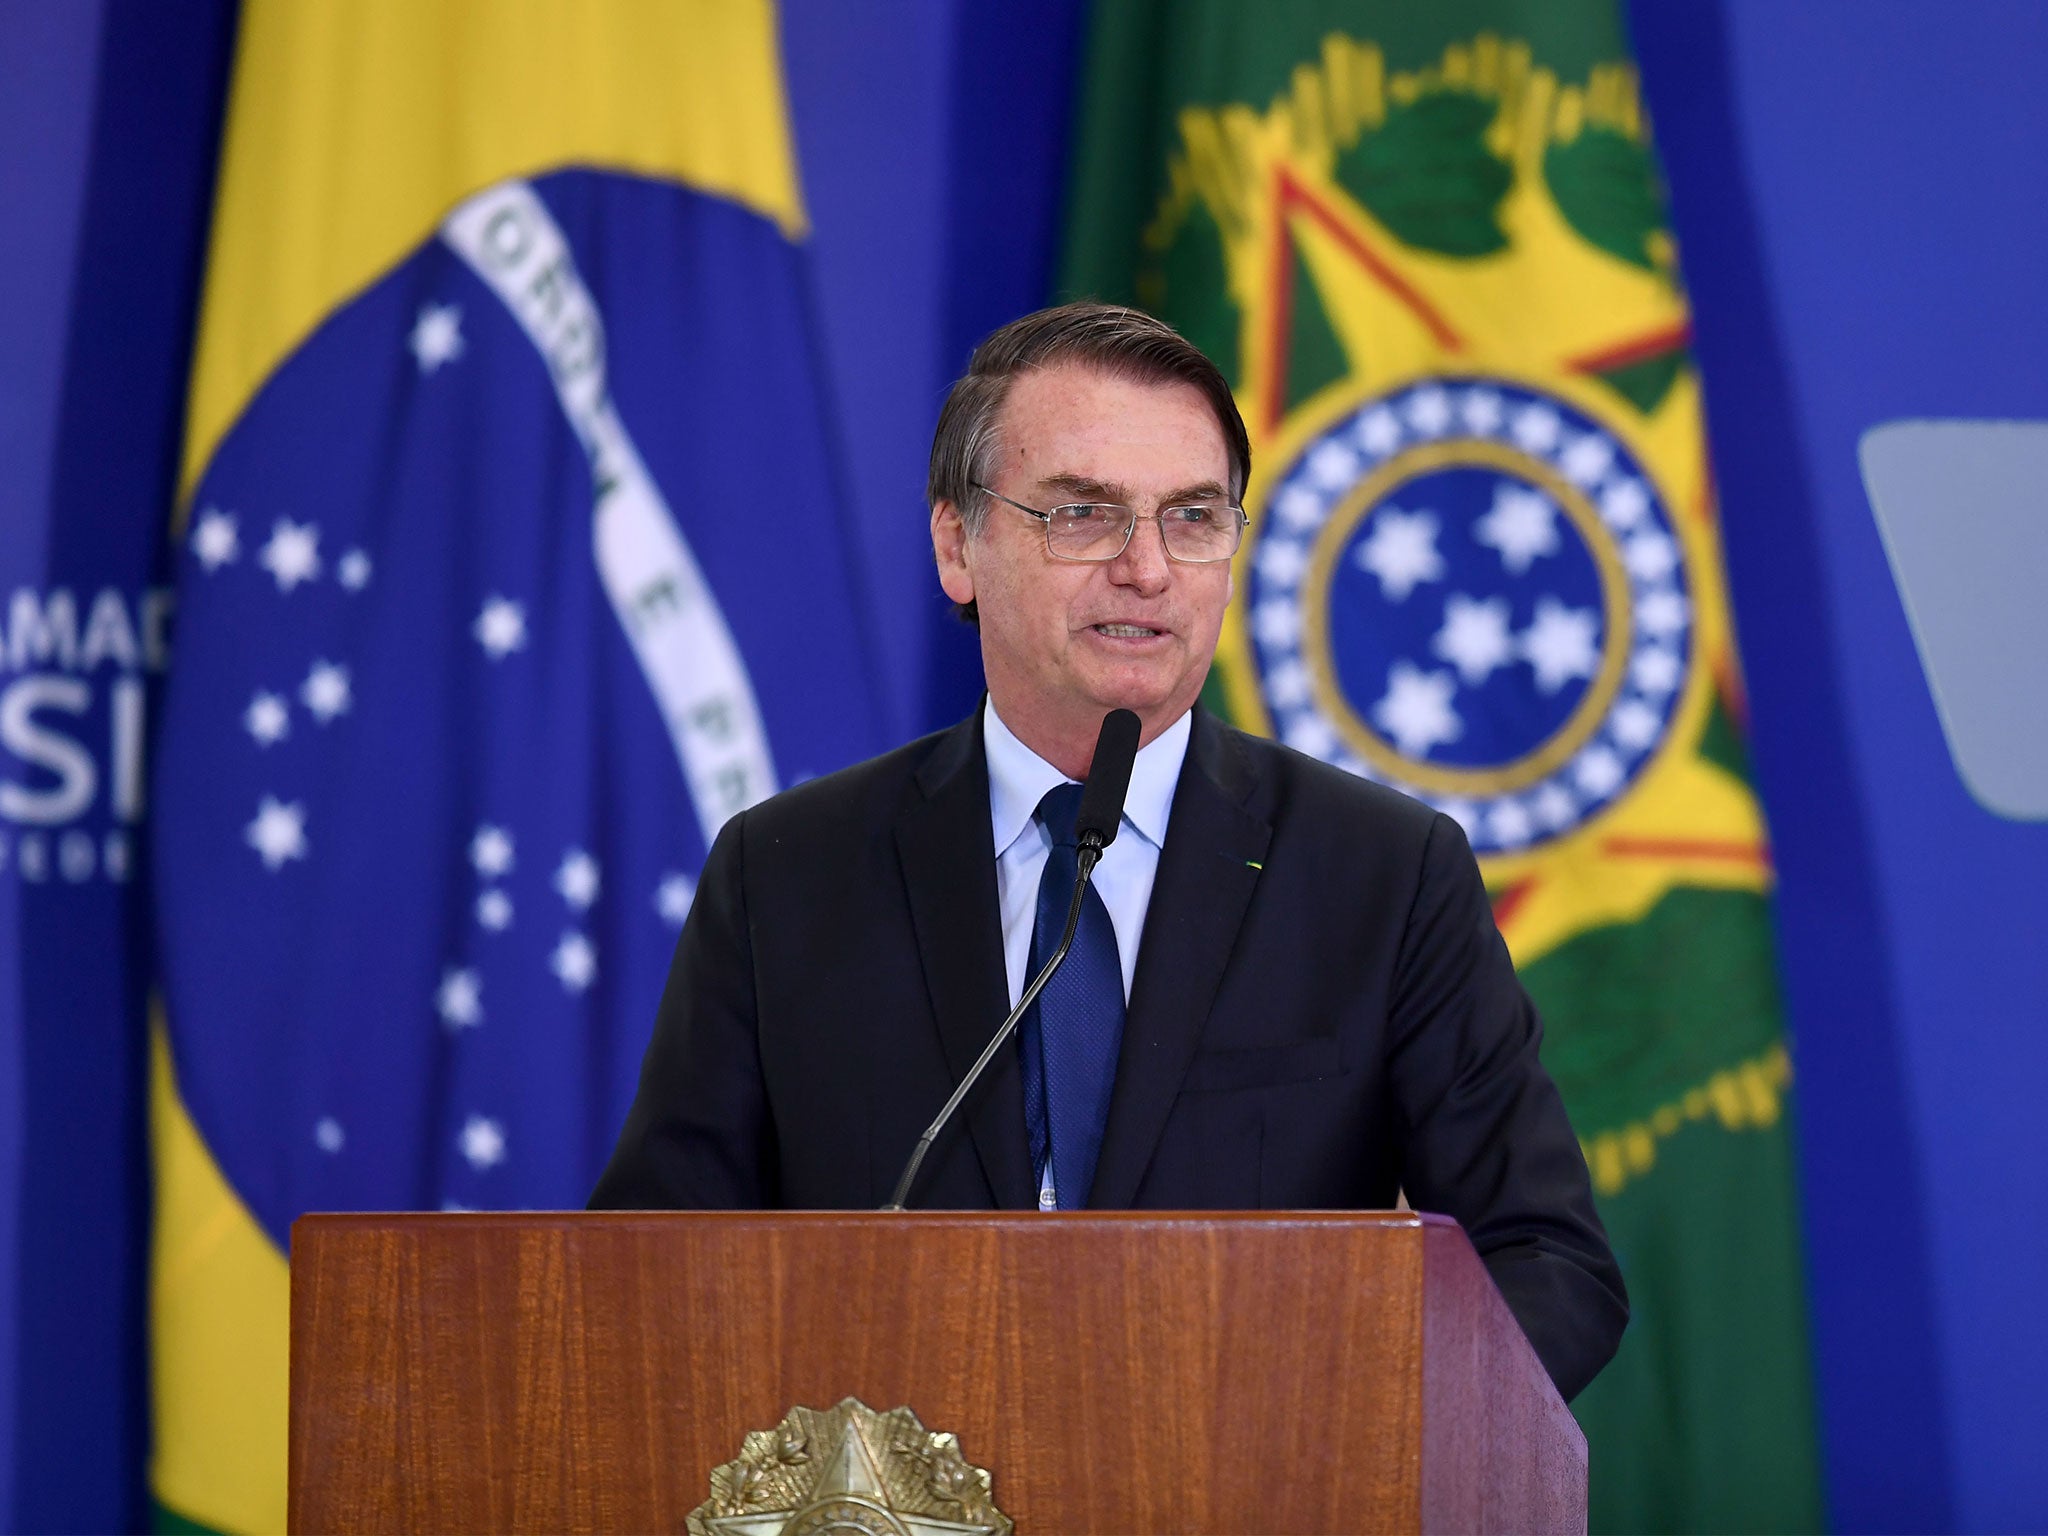 Brazil president Bolsonaro fires far-right education minister, replacing him with conspiracy theorist